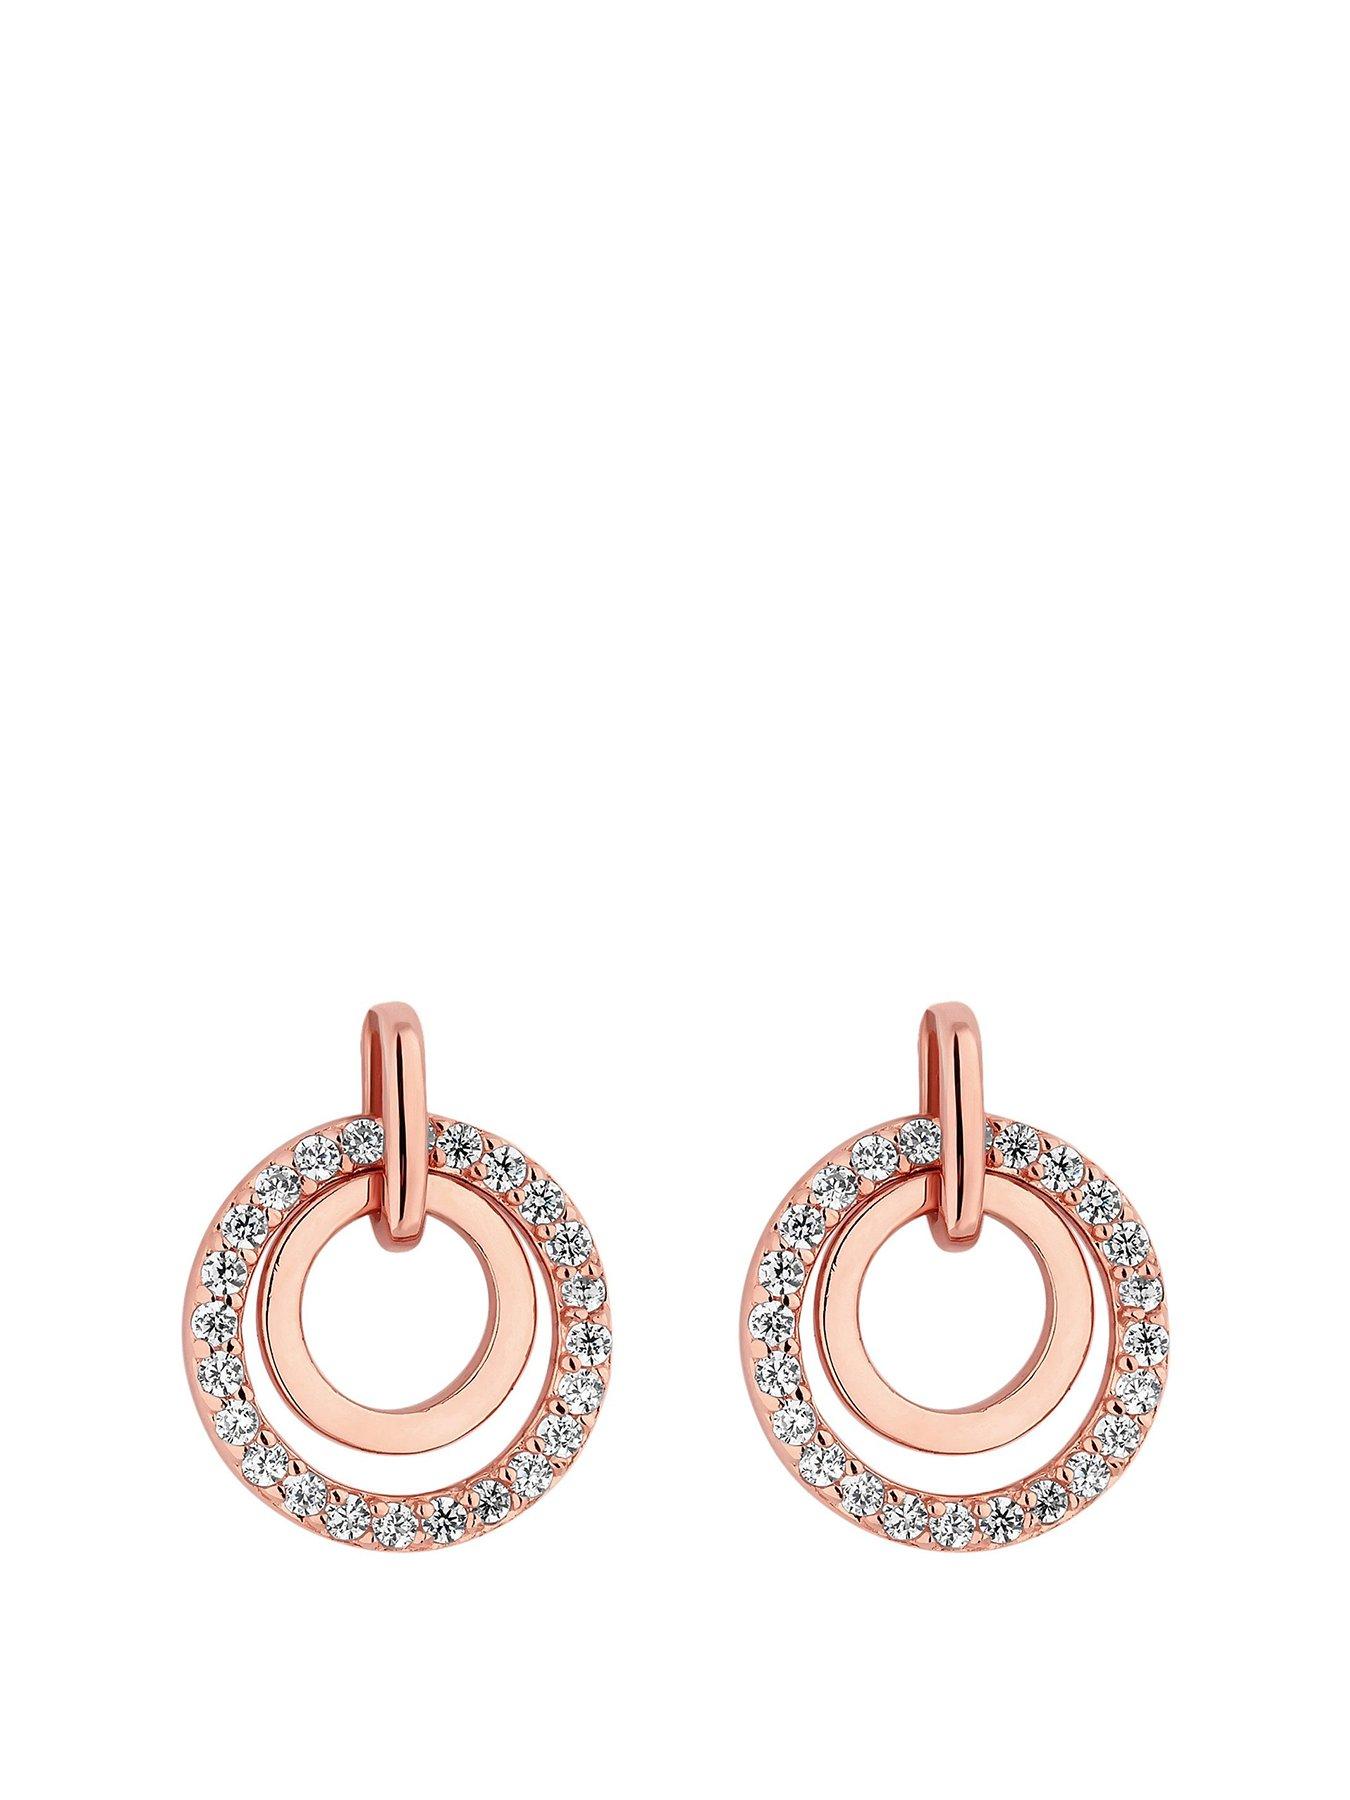  14ct Rose Gold Plated Sterling Silver Cubic Zirconia Open Drop Earrings